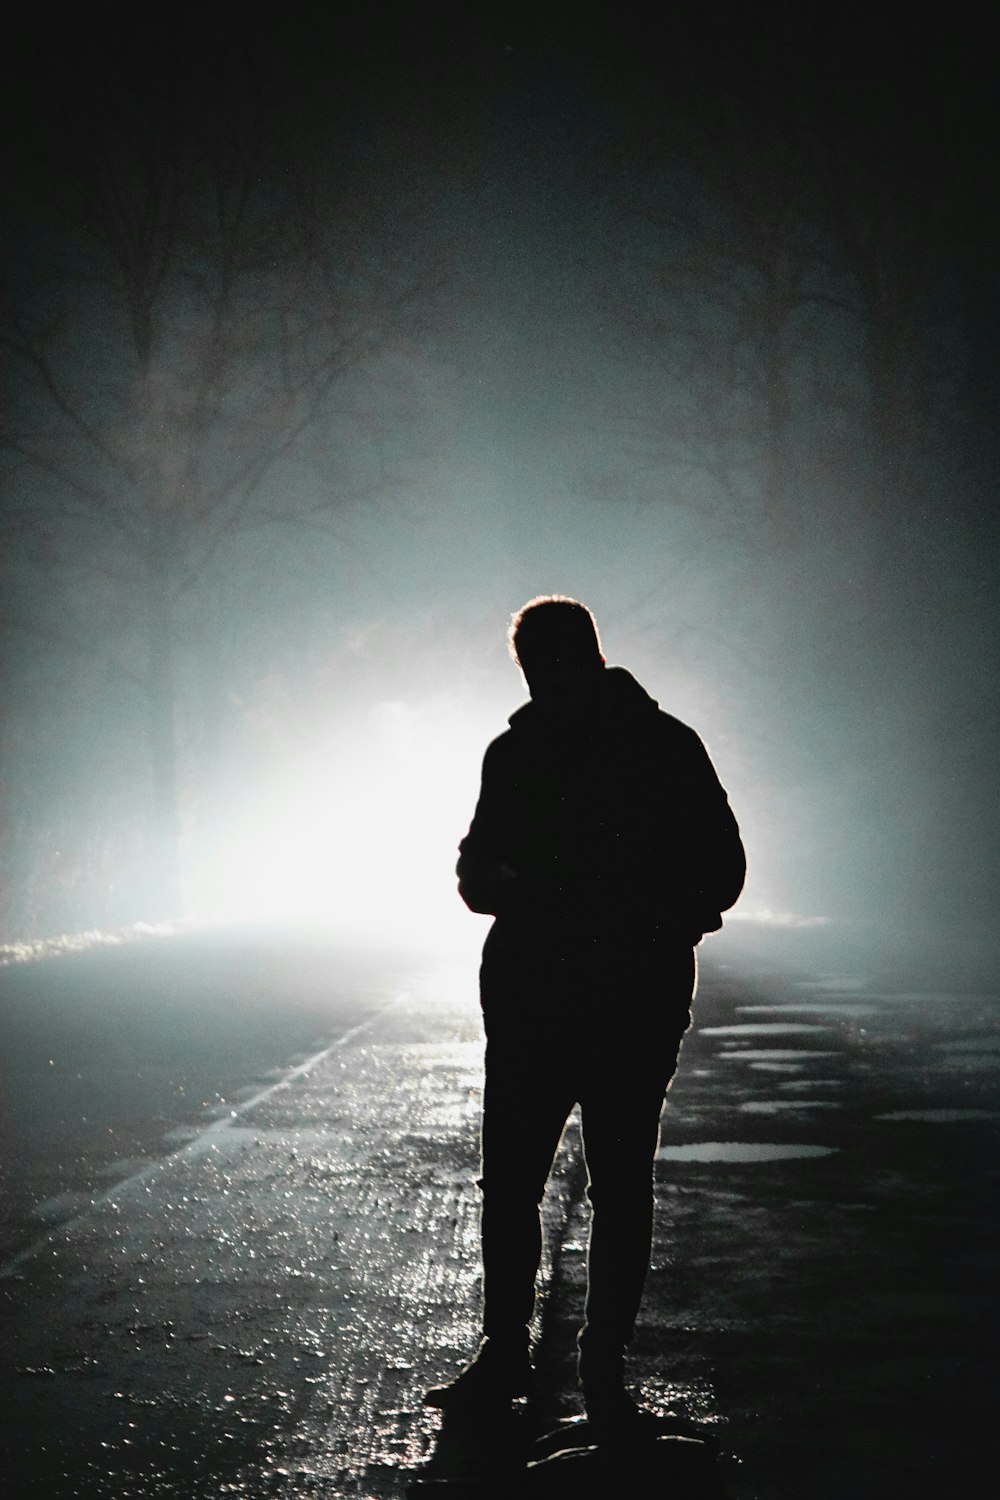 a person standing on a street in the dark